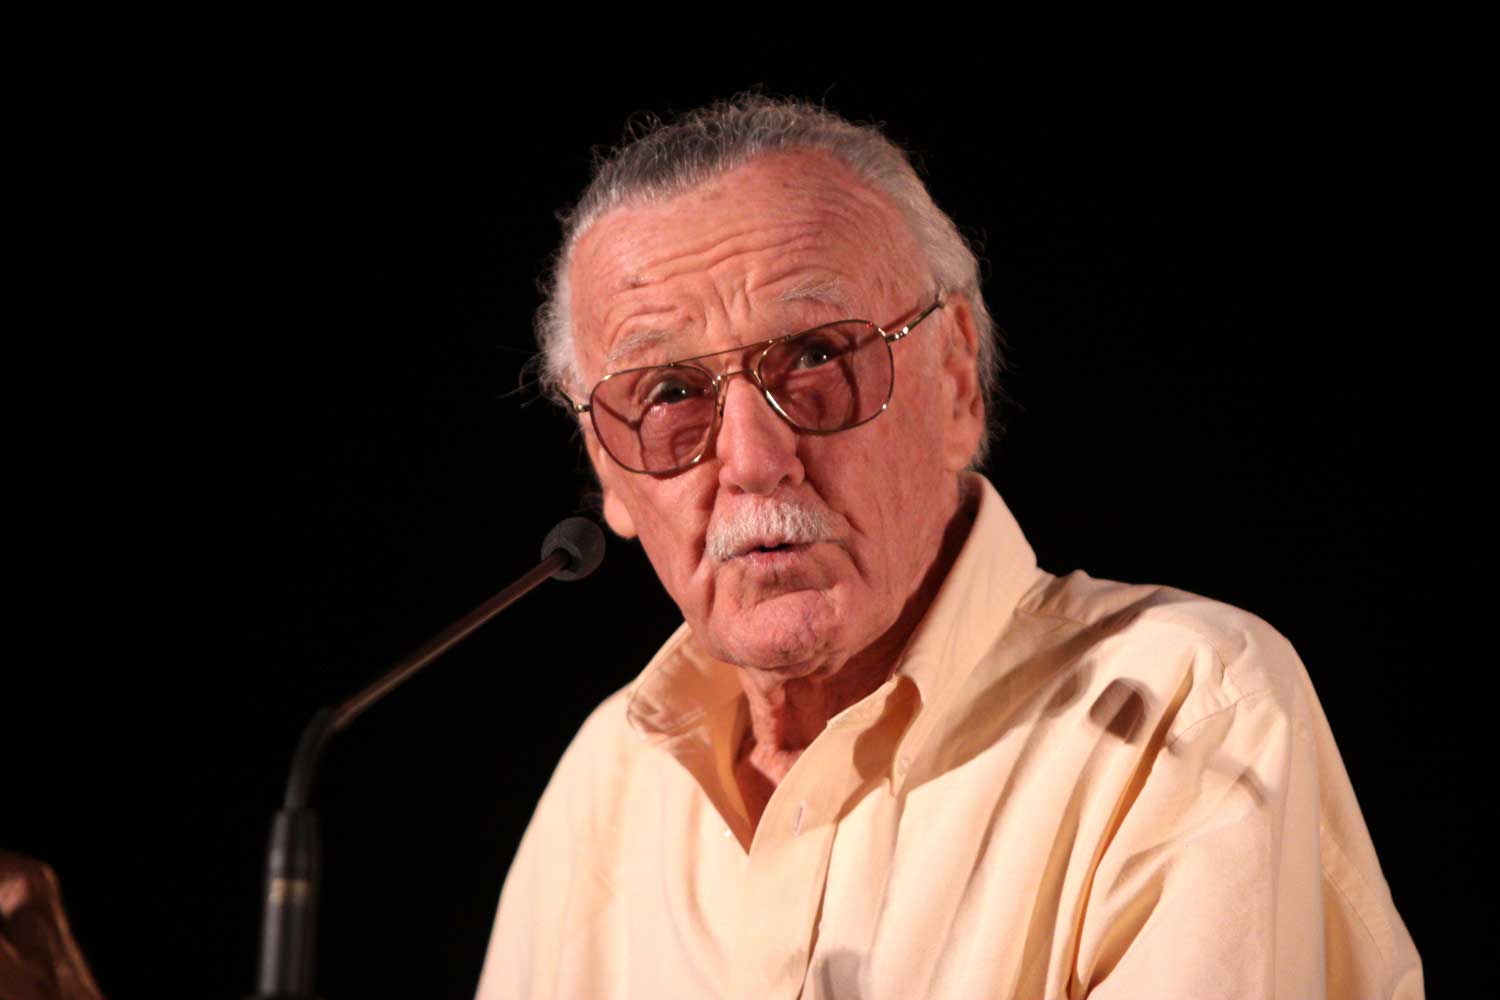 Interview With Stan Lee: The Creator of Spider-Man, Hulk, Fantastic Four, Iron Man, Thor, and X-Men